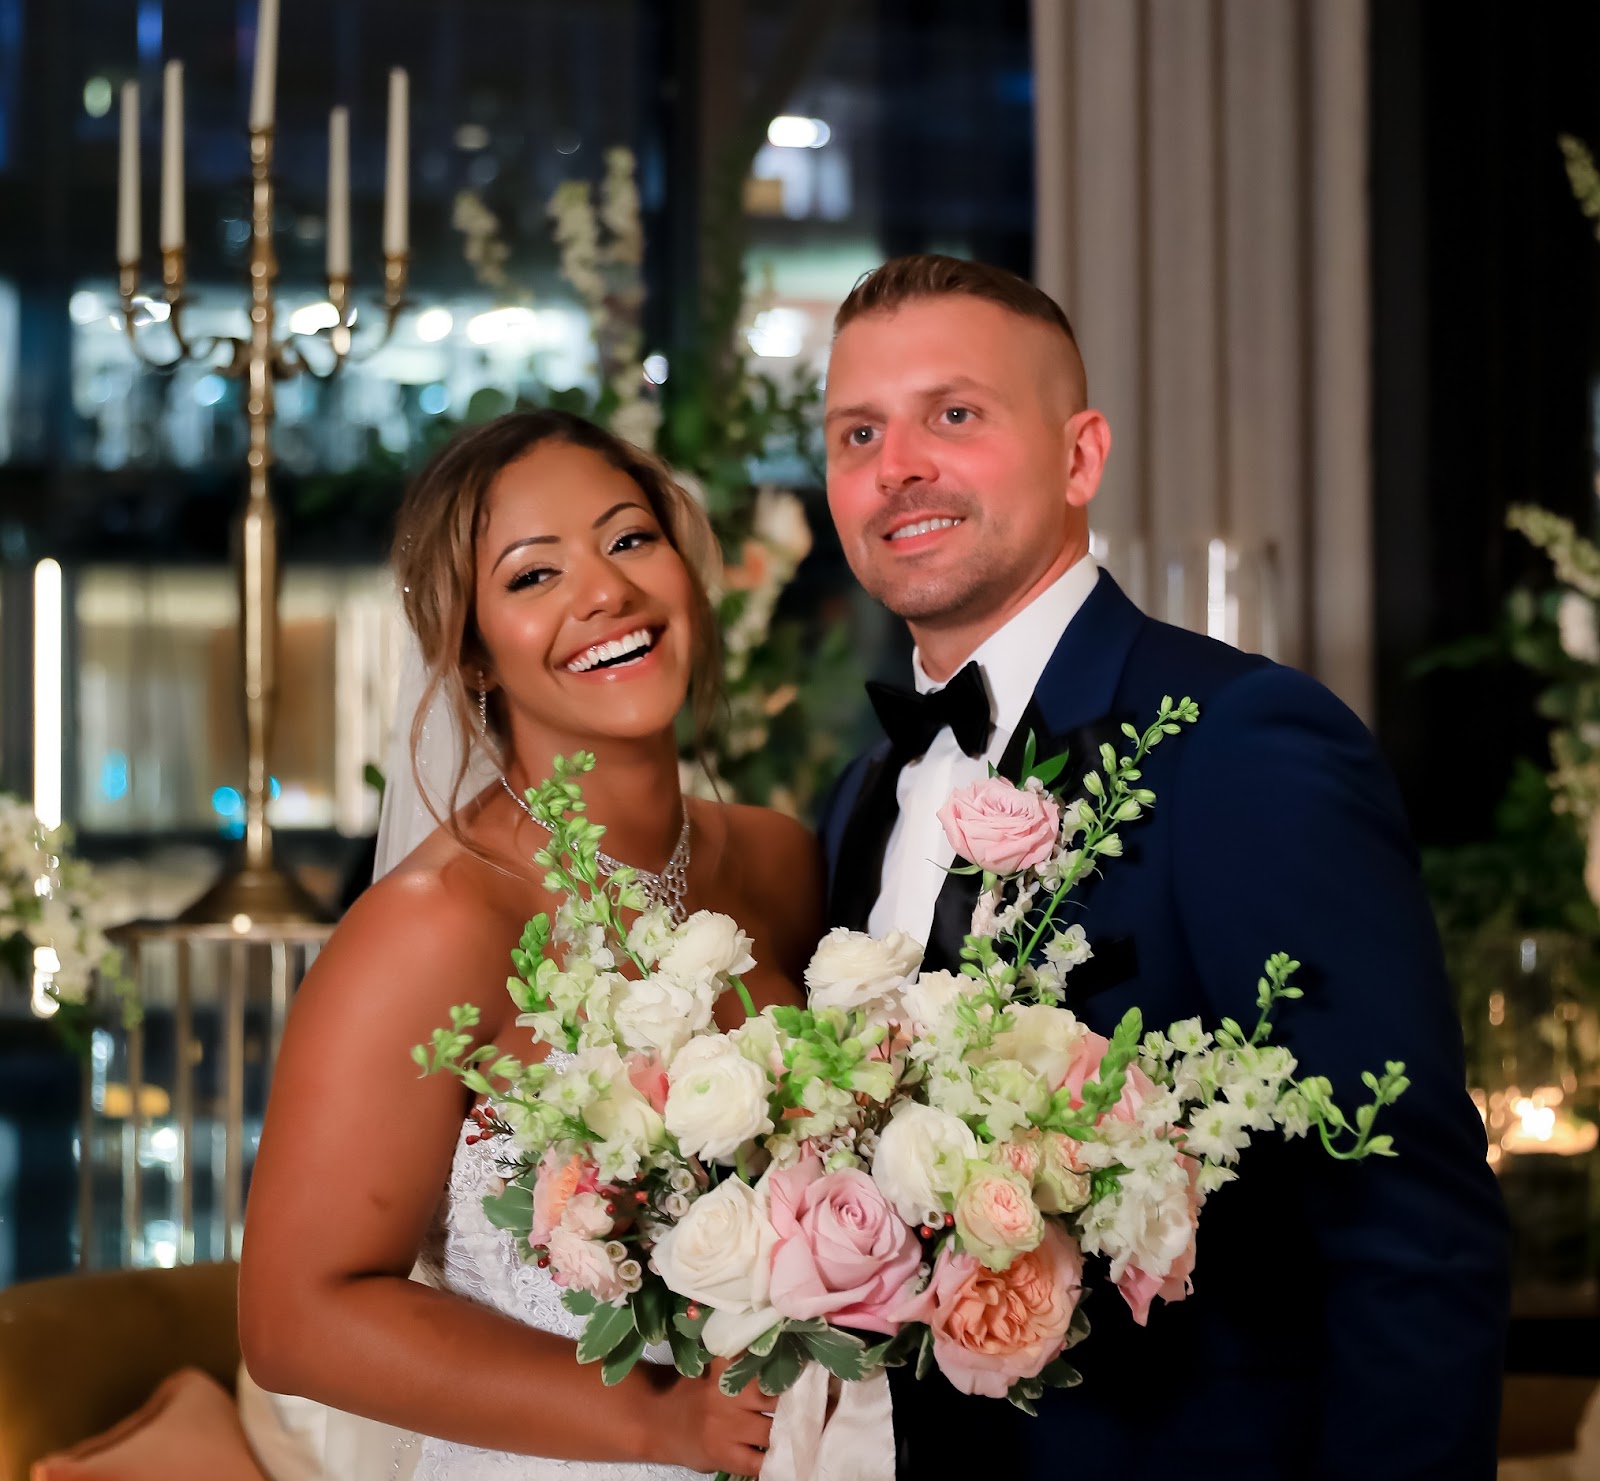 Married at First Sight Season 16 Dom Mac